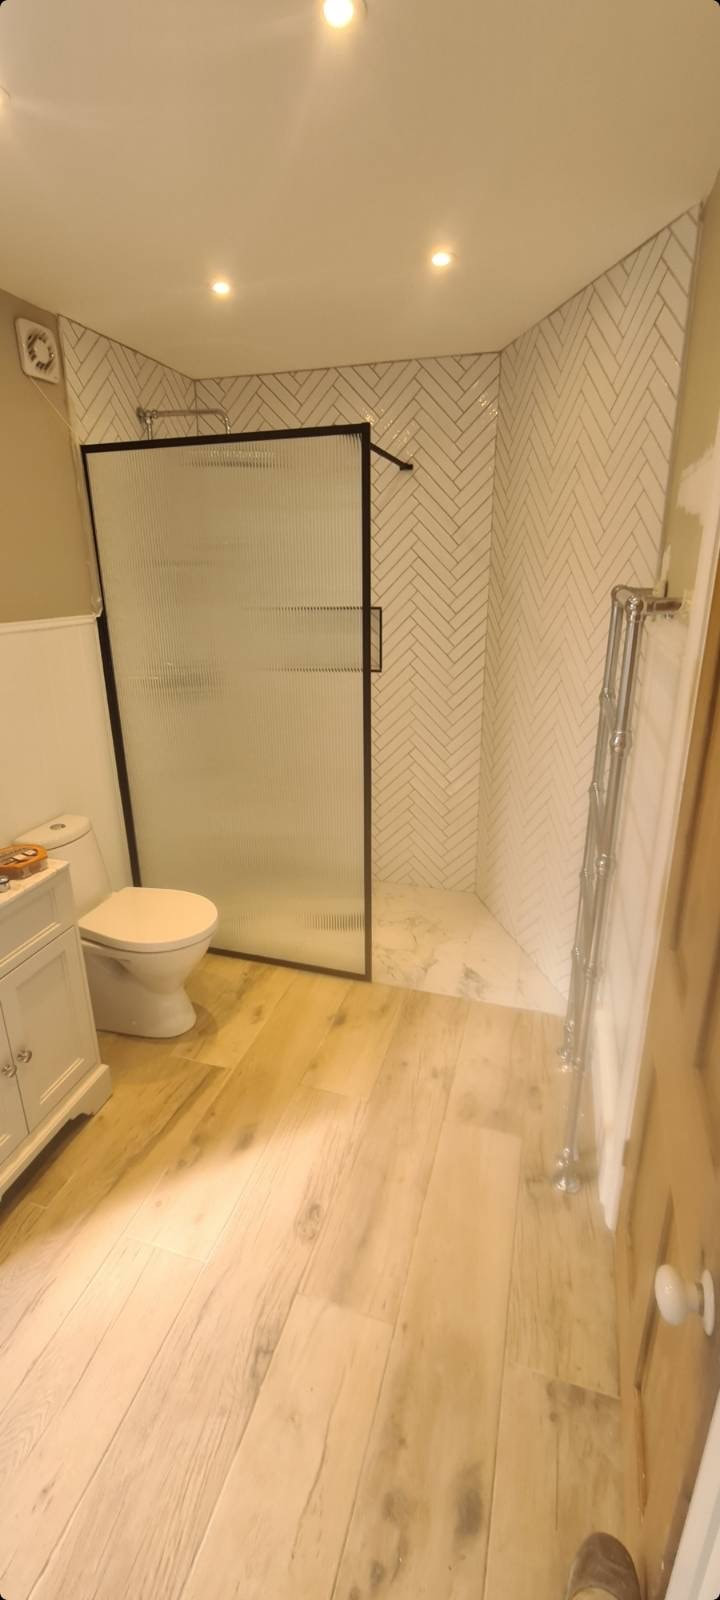 Bathroom refurbishment in Lewisham, South London_Installation of a new shower, toilet, vanity unit and bath_Holton Building Services